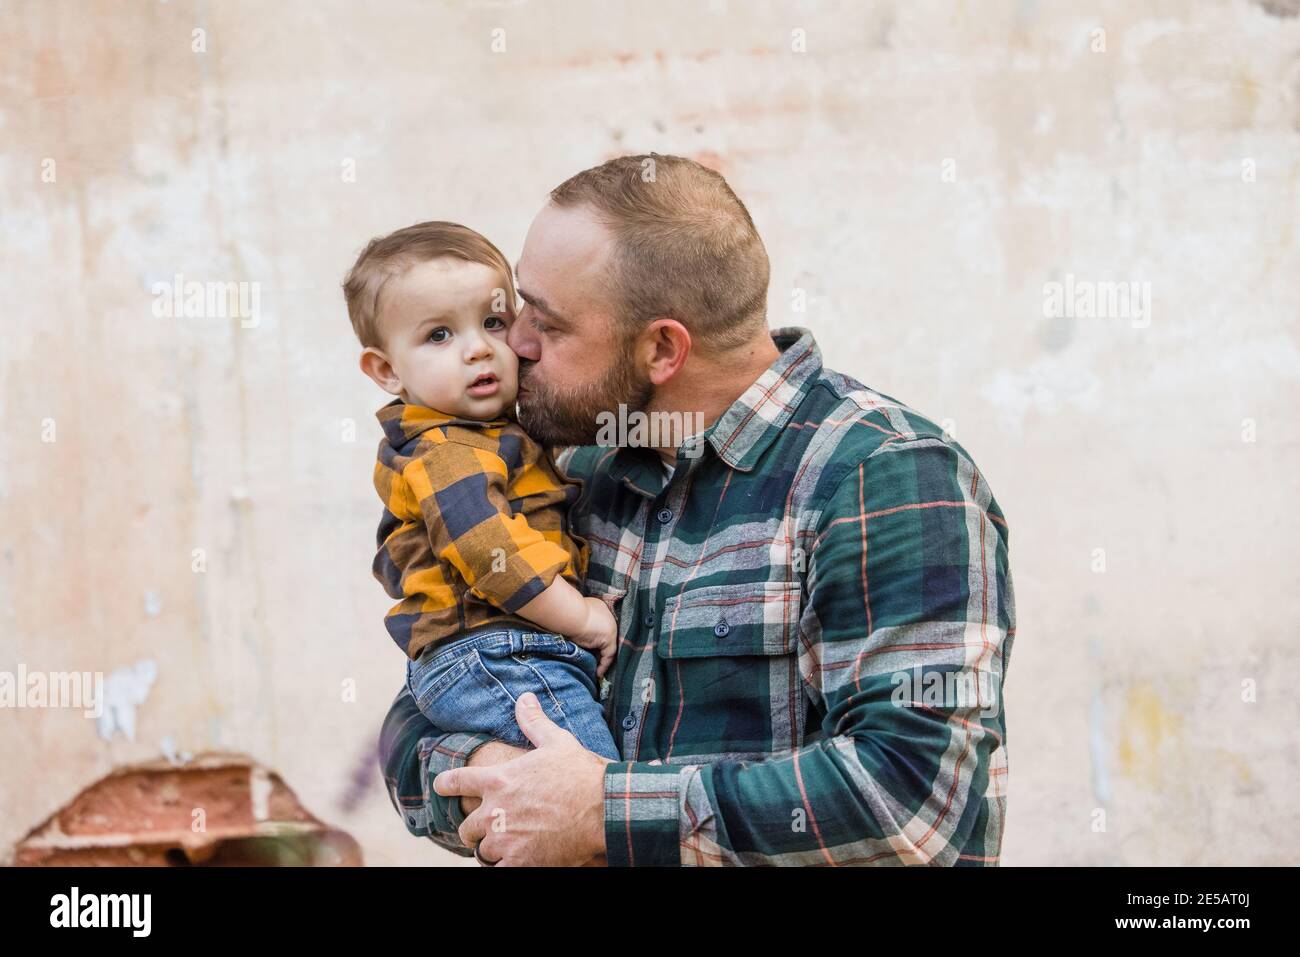 A father and his baby son outside in an urban setting against an old textured wall Stock Photo